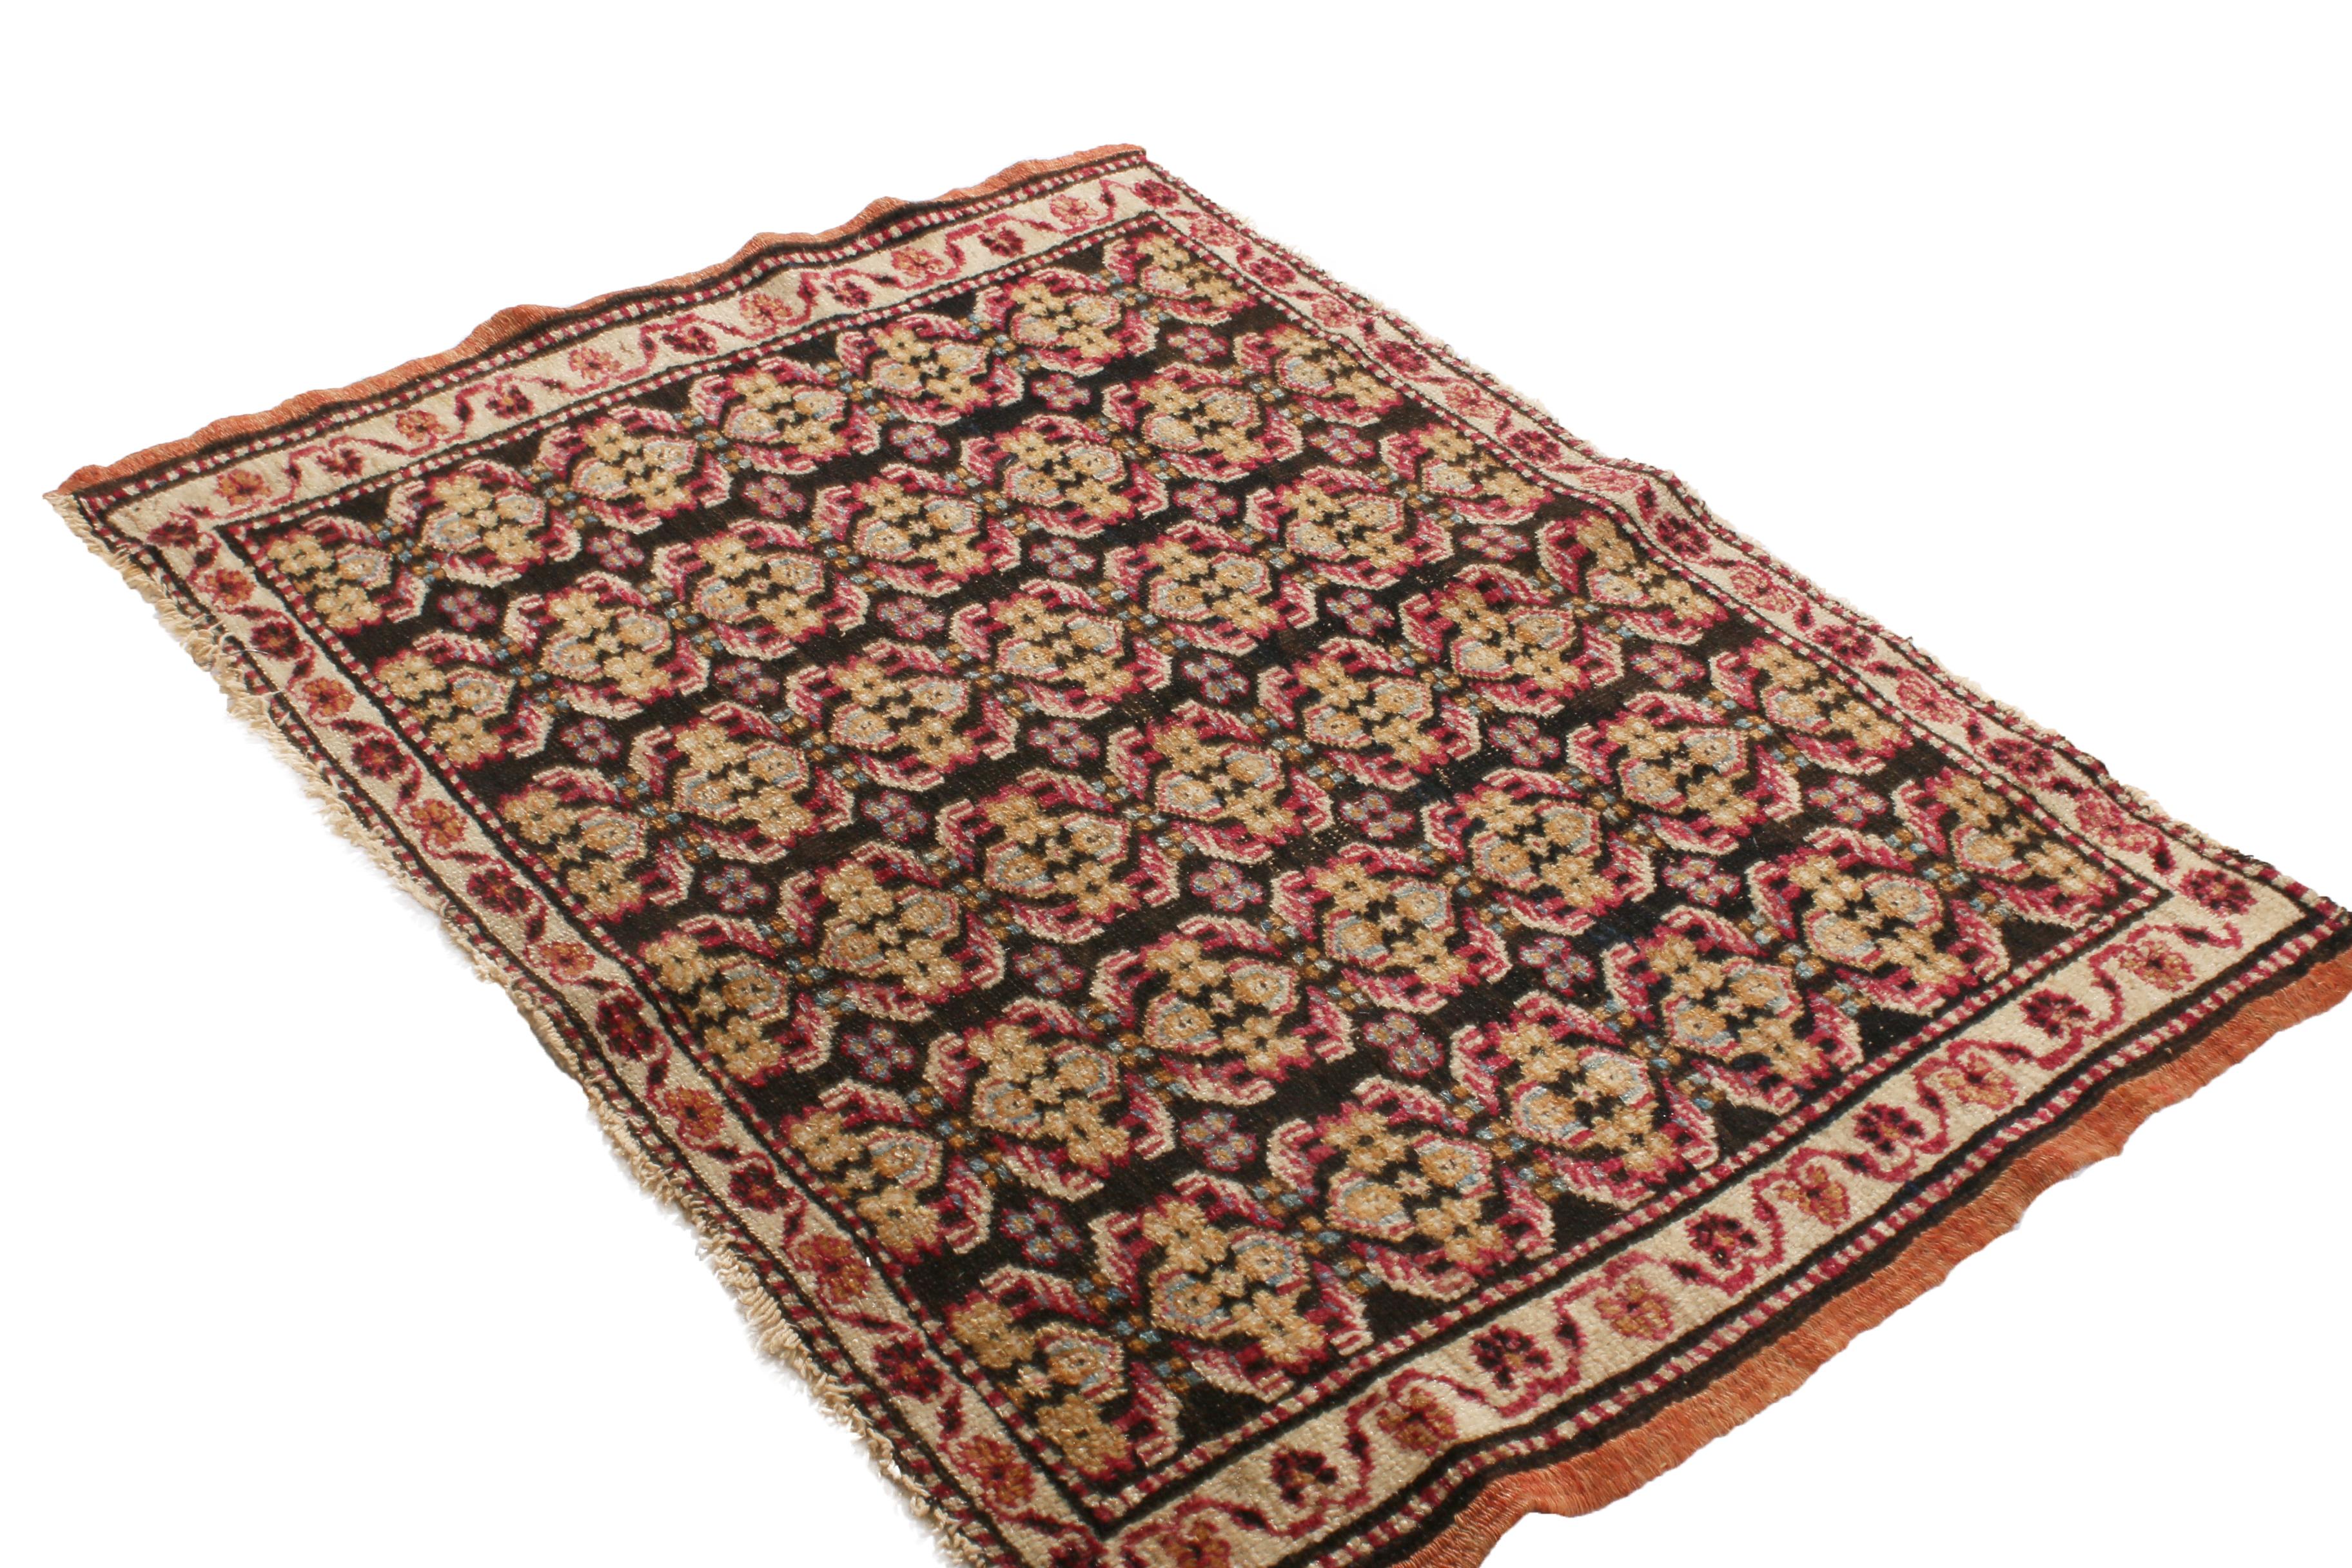 Hand-Knotted Antique Agra Geometric Beigr and Red Wool Floral Rug